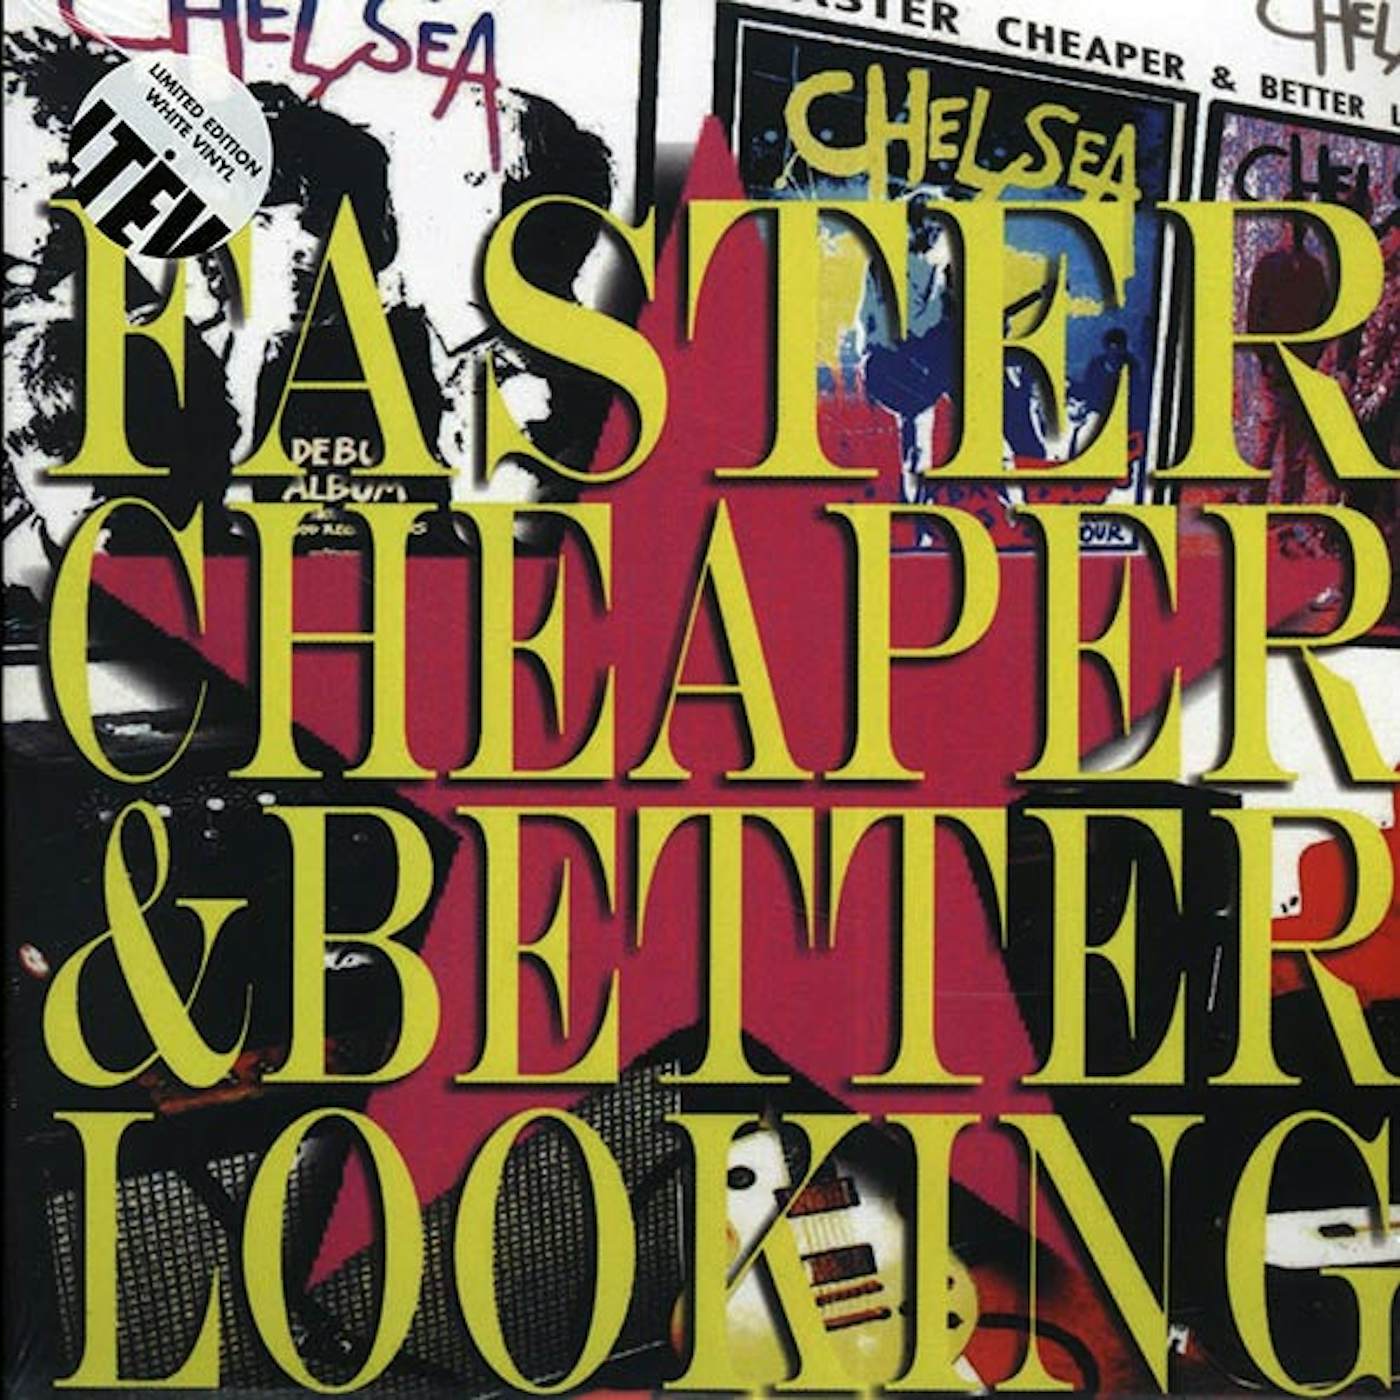 Chelsea  LP -  Faster Cheaper And Better Looking (Vinyl)